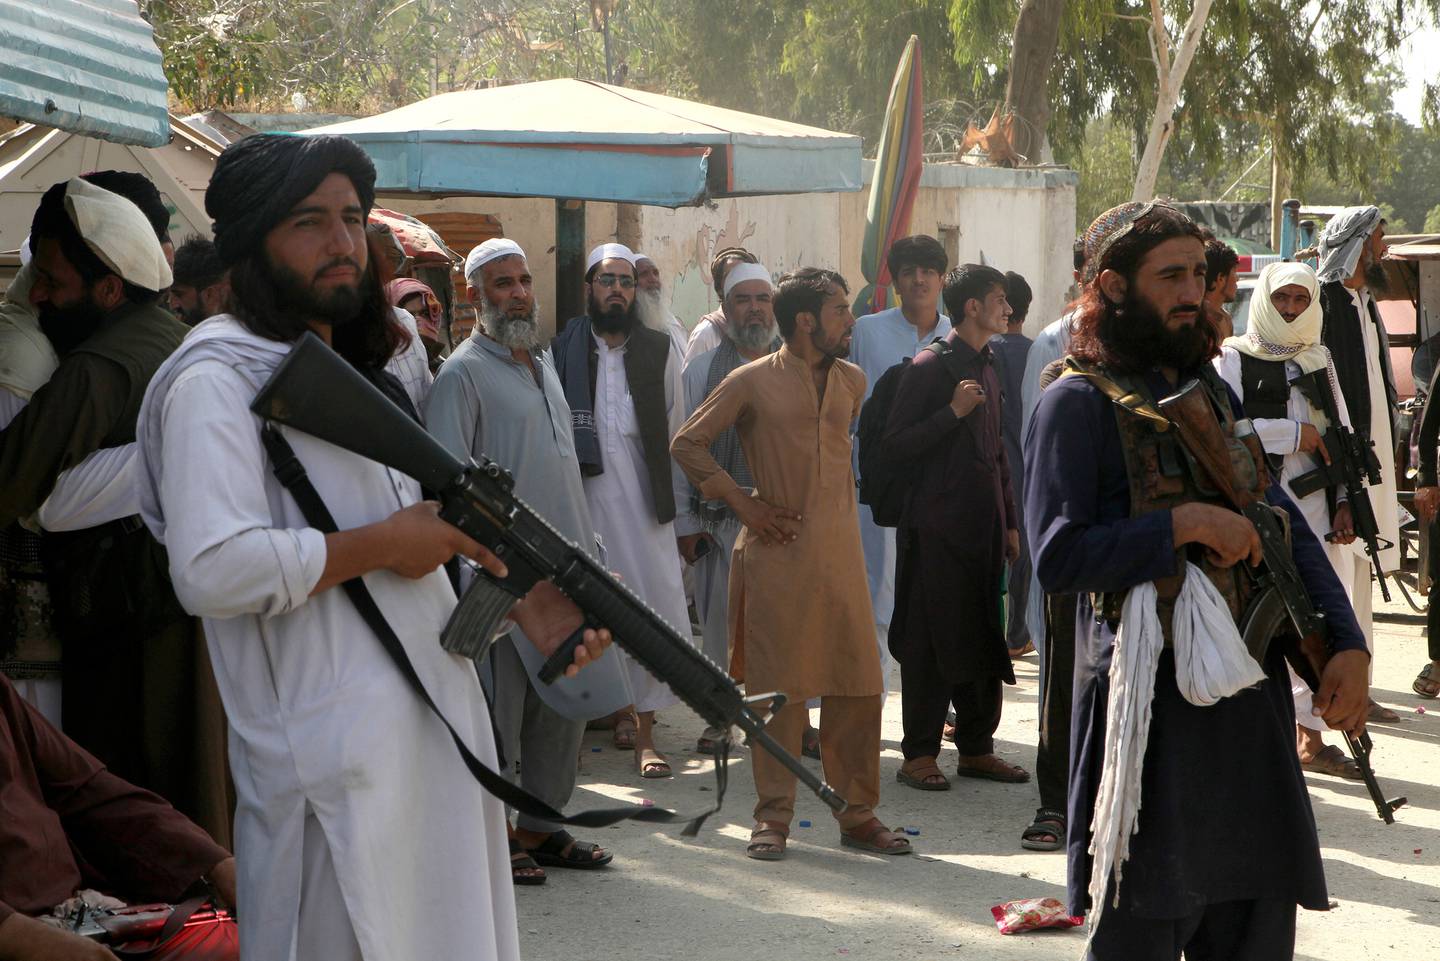 Taliban fighters stand guard on their side while people wait to cross at a border crossing point between Pakistan and Afghanistan, in Torkham, in Khyber district, Pakistan. Photo / AP